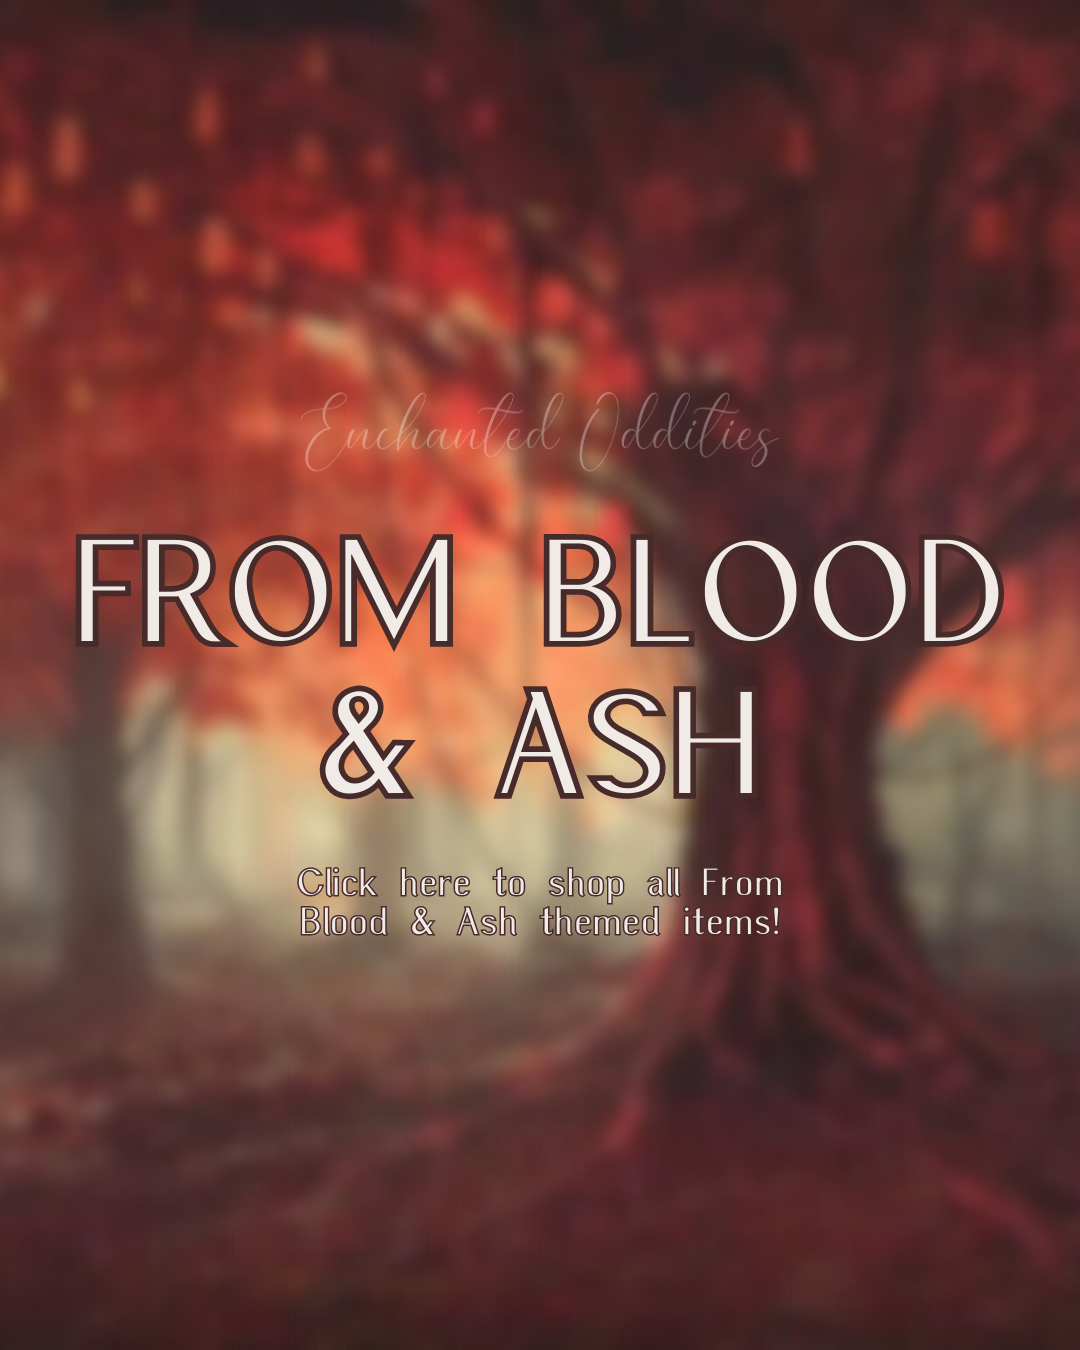 ✧ FROM BLOOD & ASH COLLECTION ✧